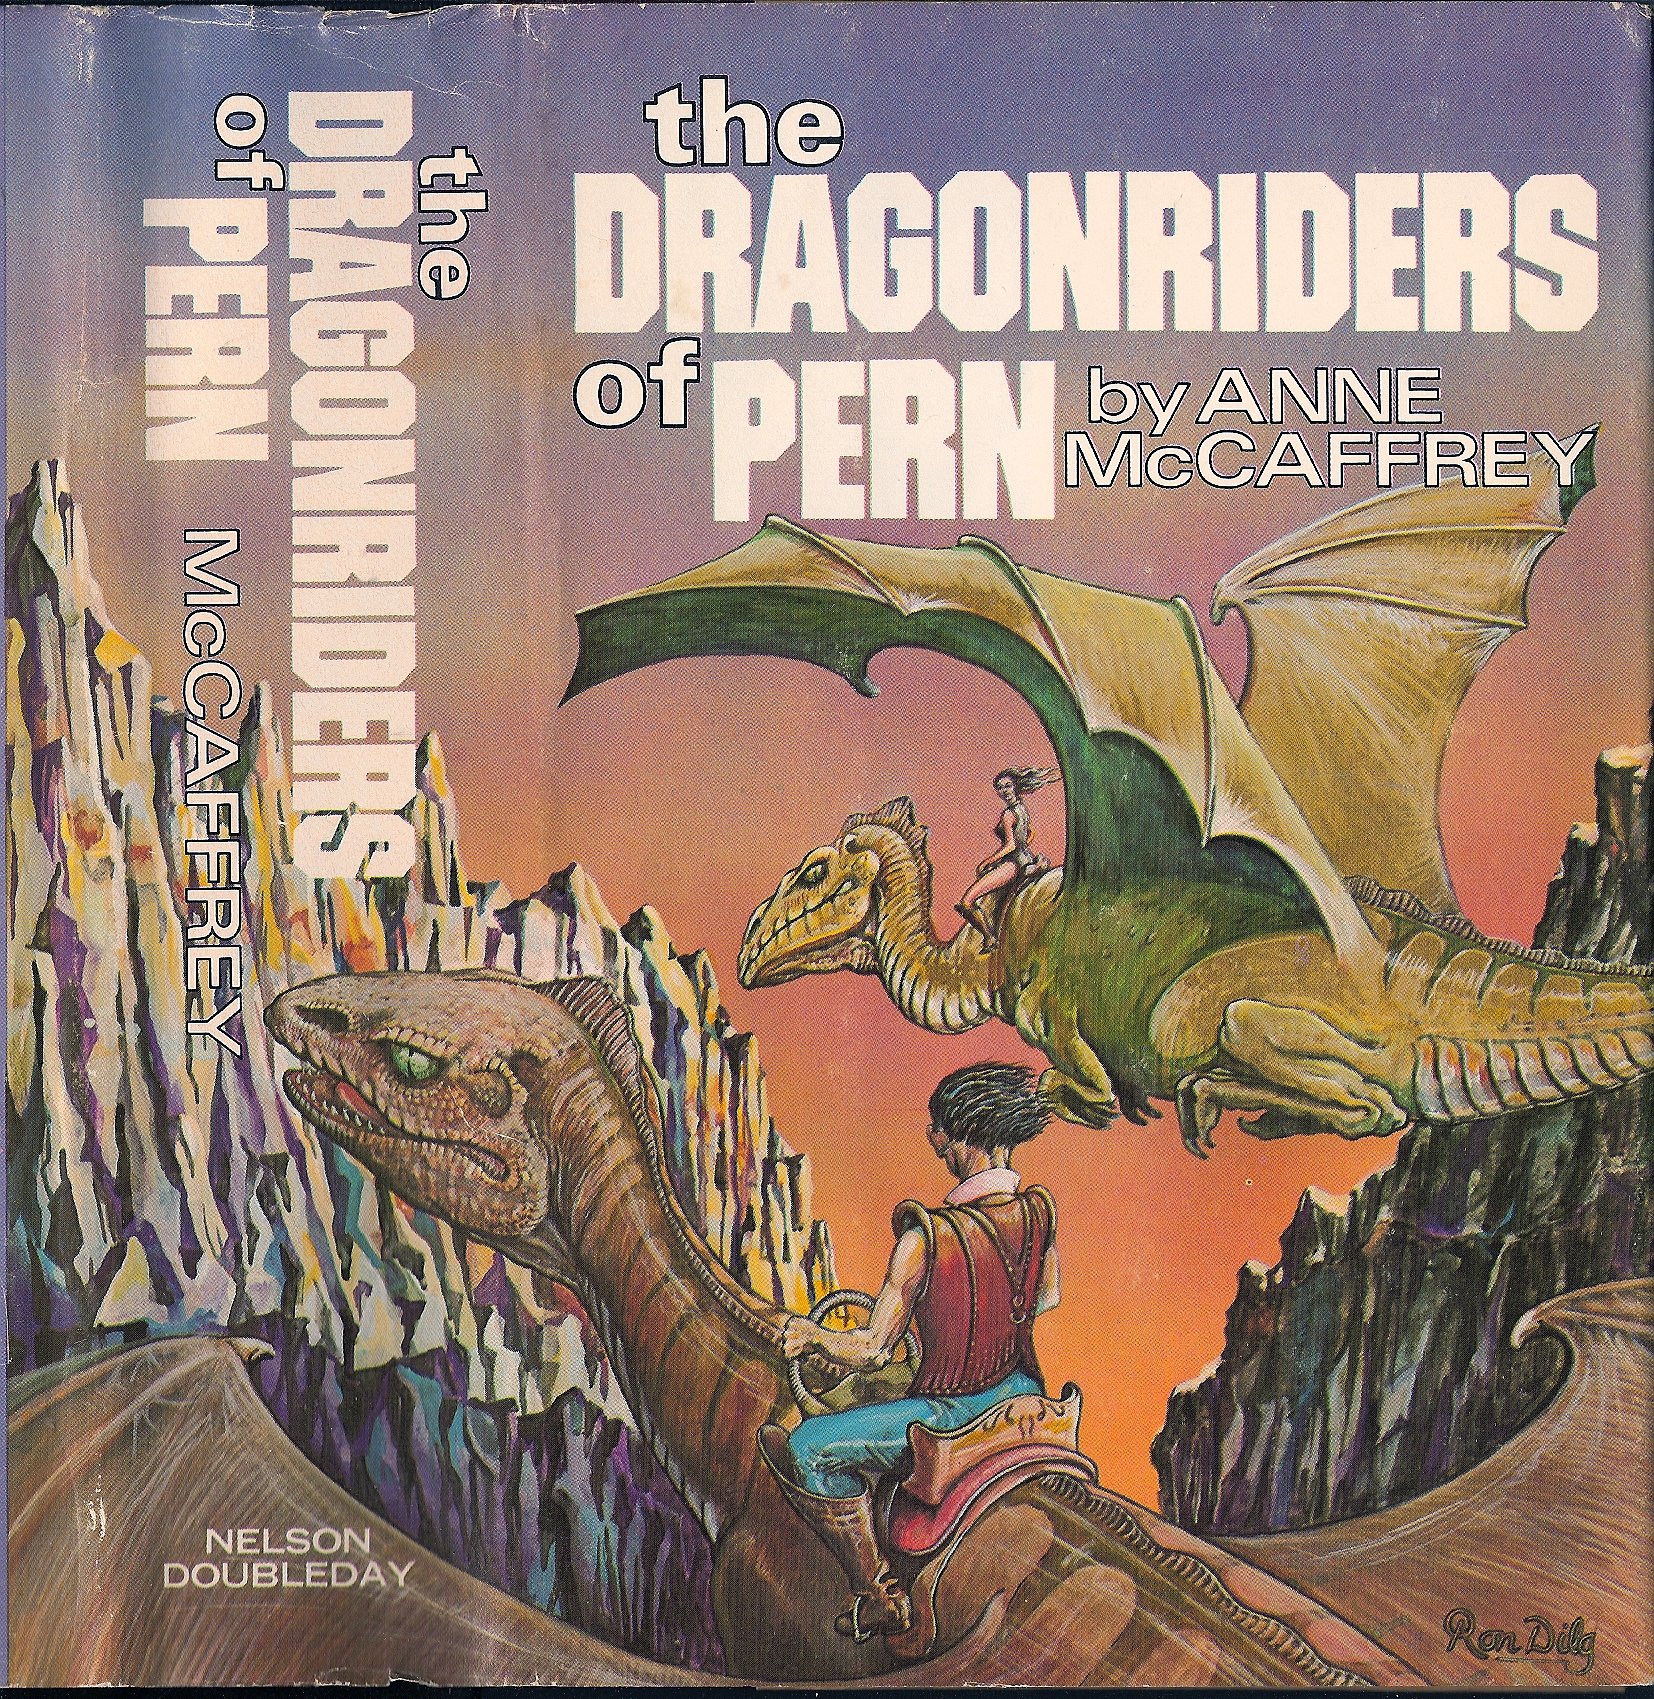 A cover of a book. The book is 'The Dragonriders of Pern,' by Anne McCaffrey. On it is a painting, in a classic sci-fi style, of two dragons flying over mountains, with one person sitting on each's back.